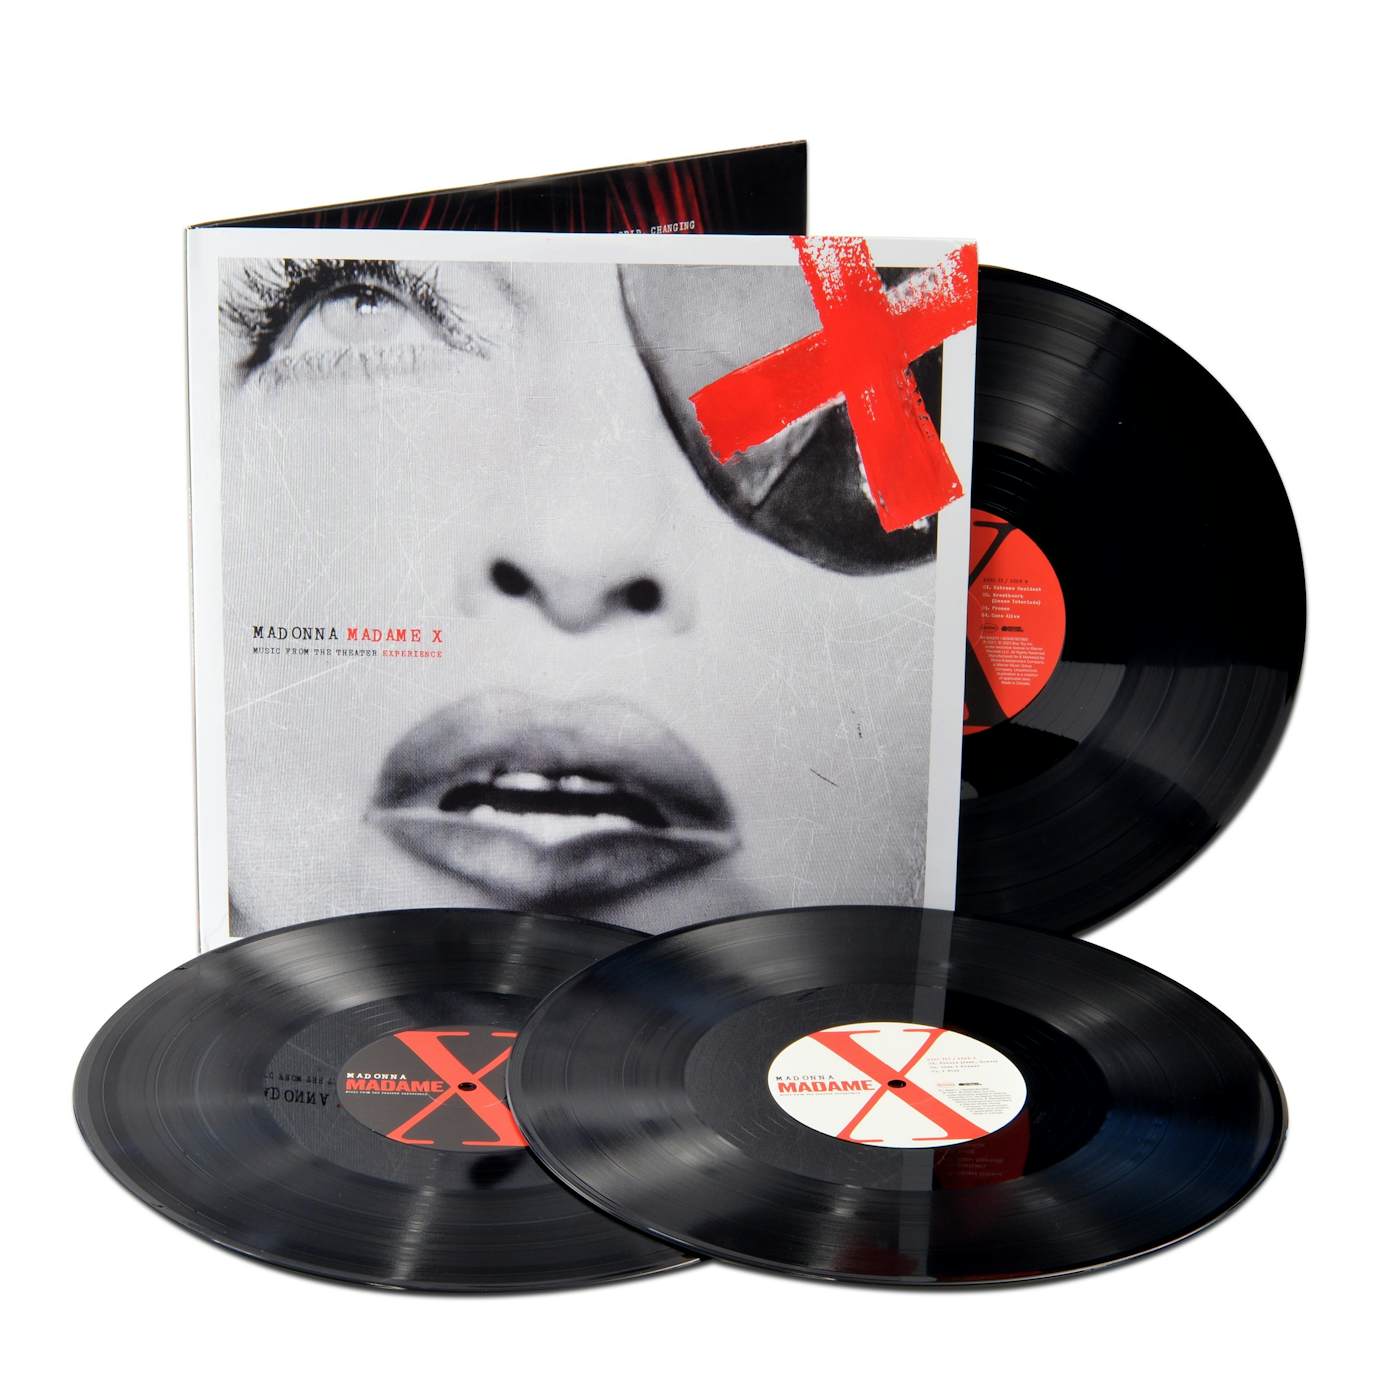 Madonna MADAME X – MUSIC FROM THE THEATRE XPERIENCE 3LP (Black vinyl)